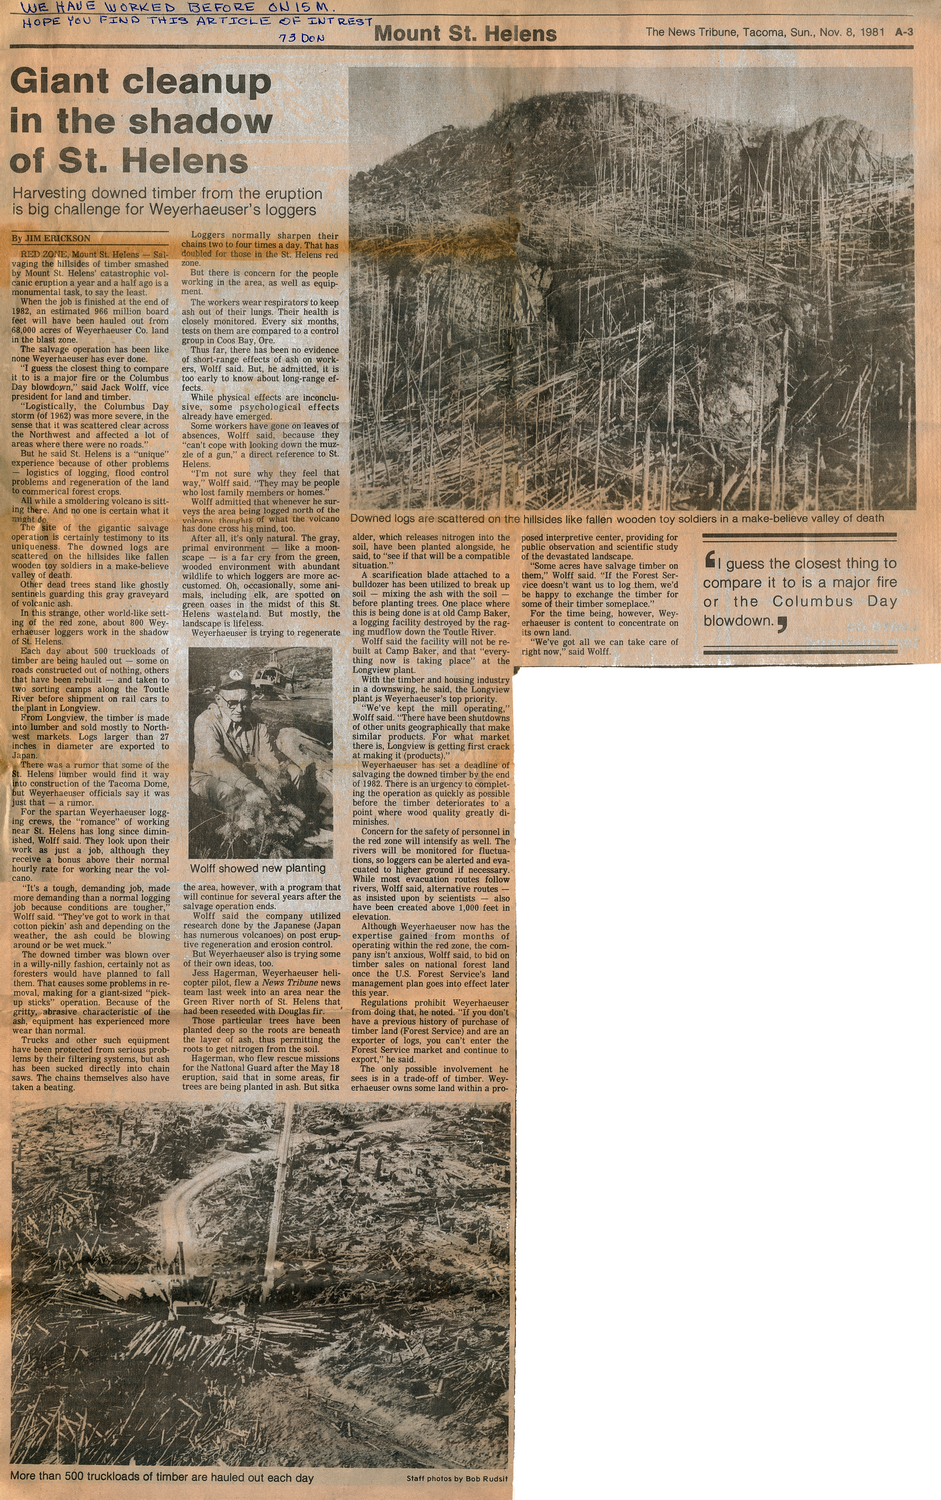 Newspaper Article about the Mt. St. Helens Volcano from the Tacoma News Tribune, dated Sunday 8th November 1981